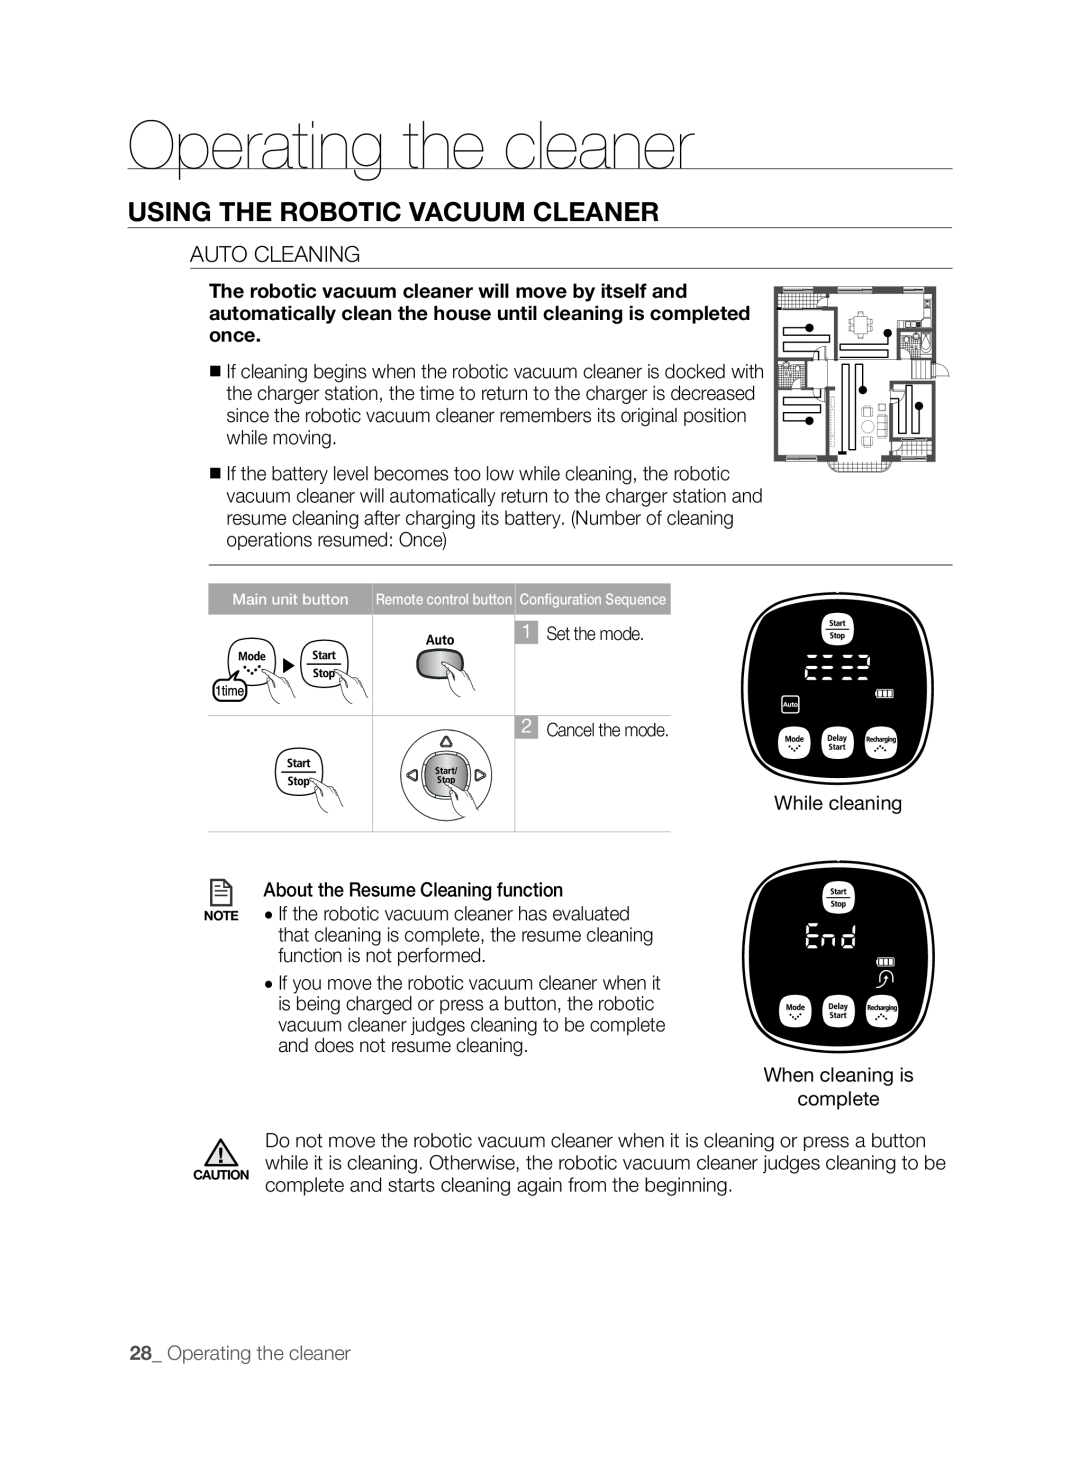 Samsung SR8830, VCR8830T1R, DJ68-00518A Using the robotic vacuum cleaner, Auto Cleaning, 28_ Operating the cleaner 